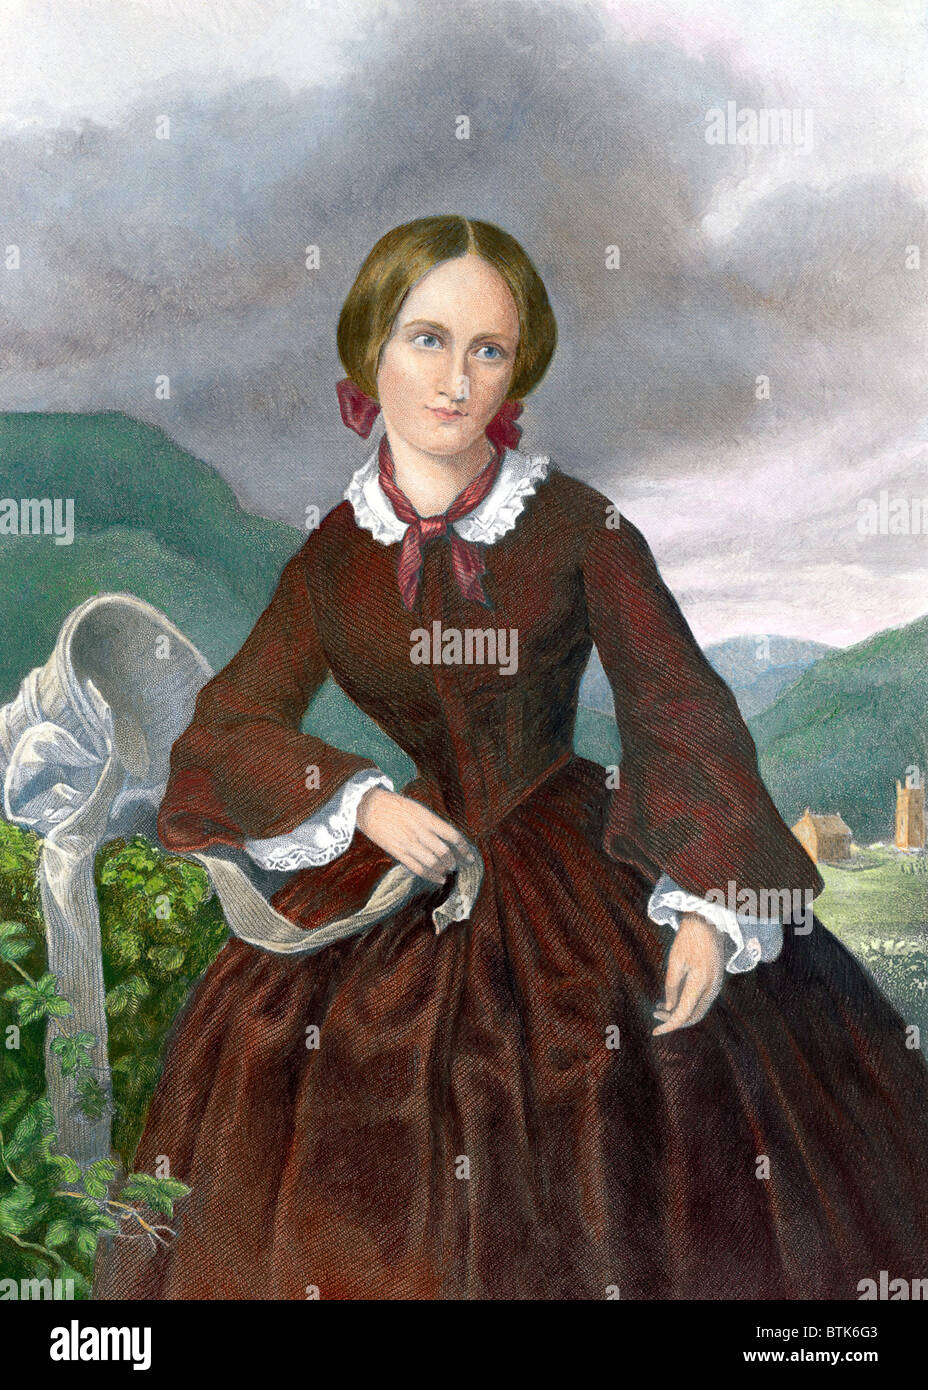 Charlotte Bronte (1816-1855) English novelist best known for JANE ERYE (1847). 19th century engraving by William Jackman with modern color. Photo: Barbara Cushing/Everett Collection Stock Photo